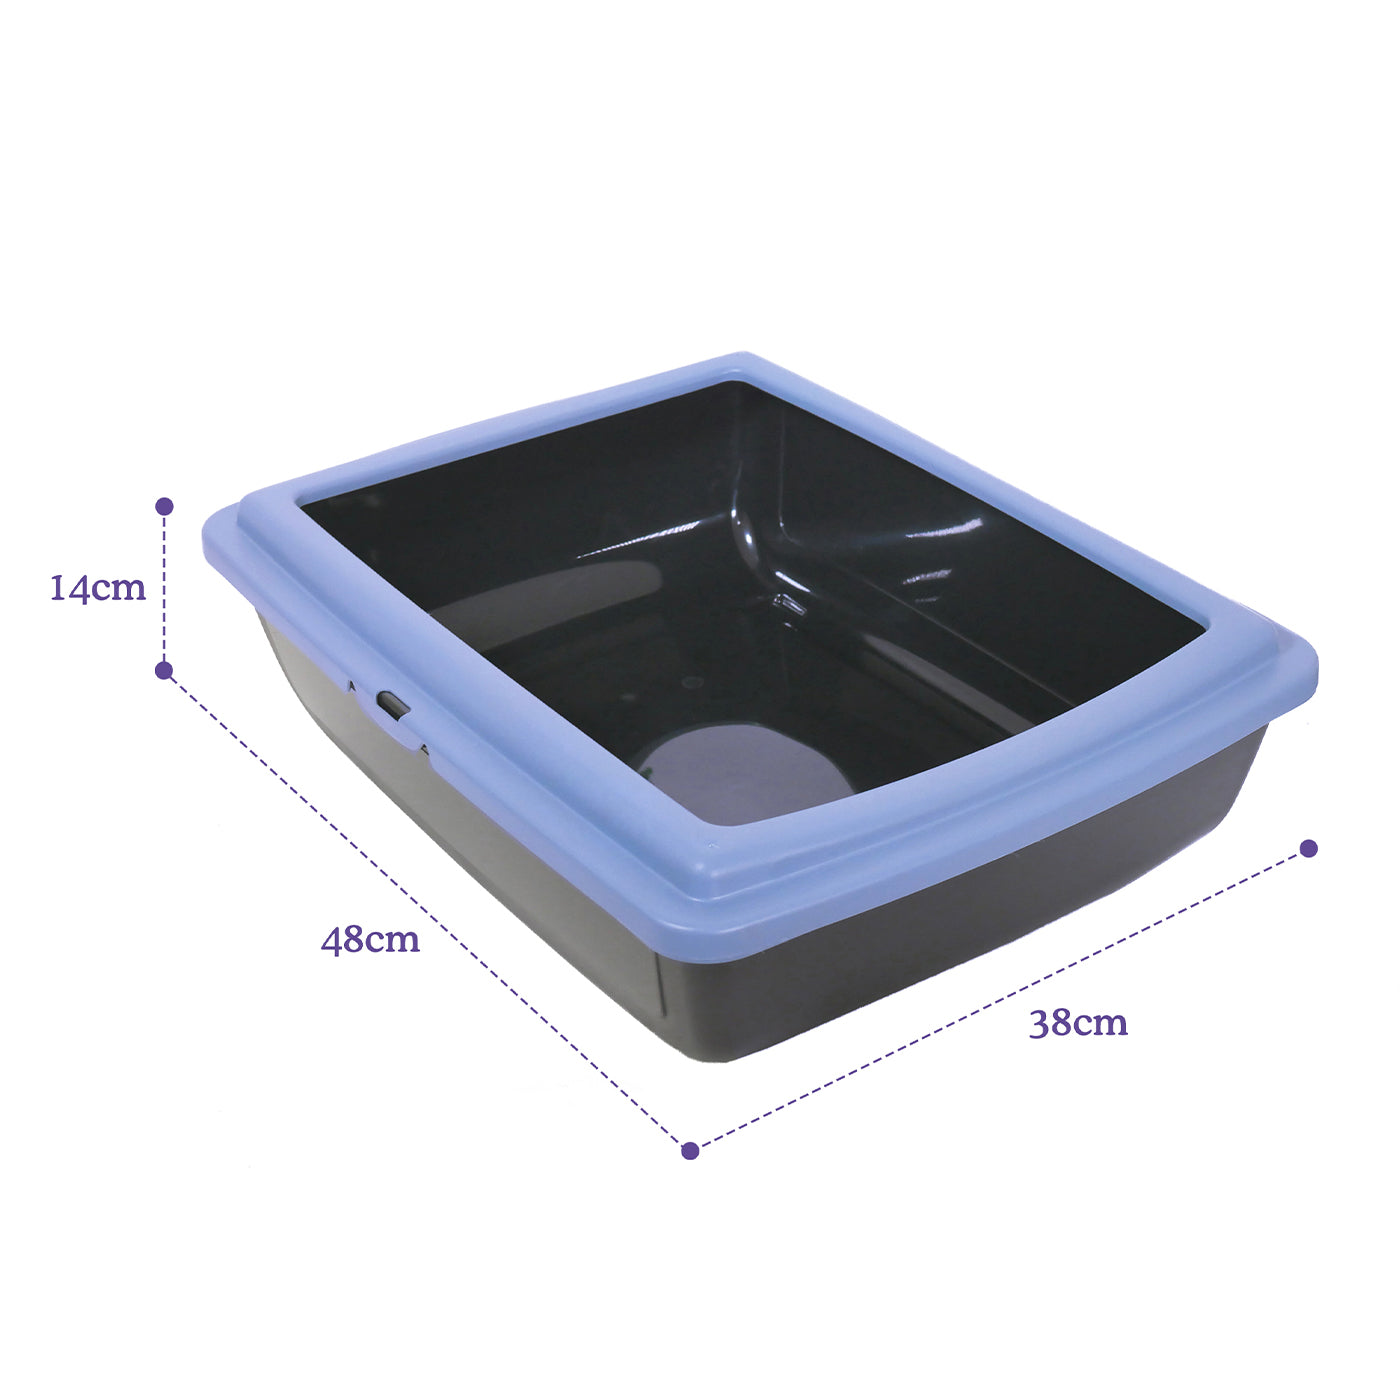 Rosewood Eco Line Litter Tray with Rim